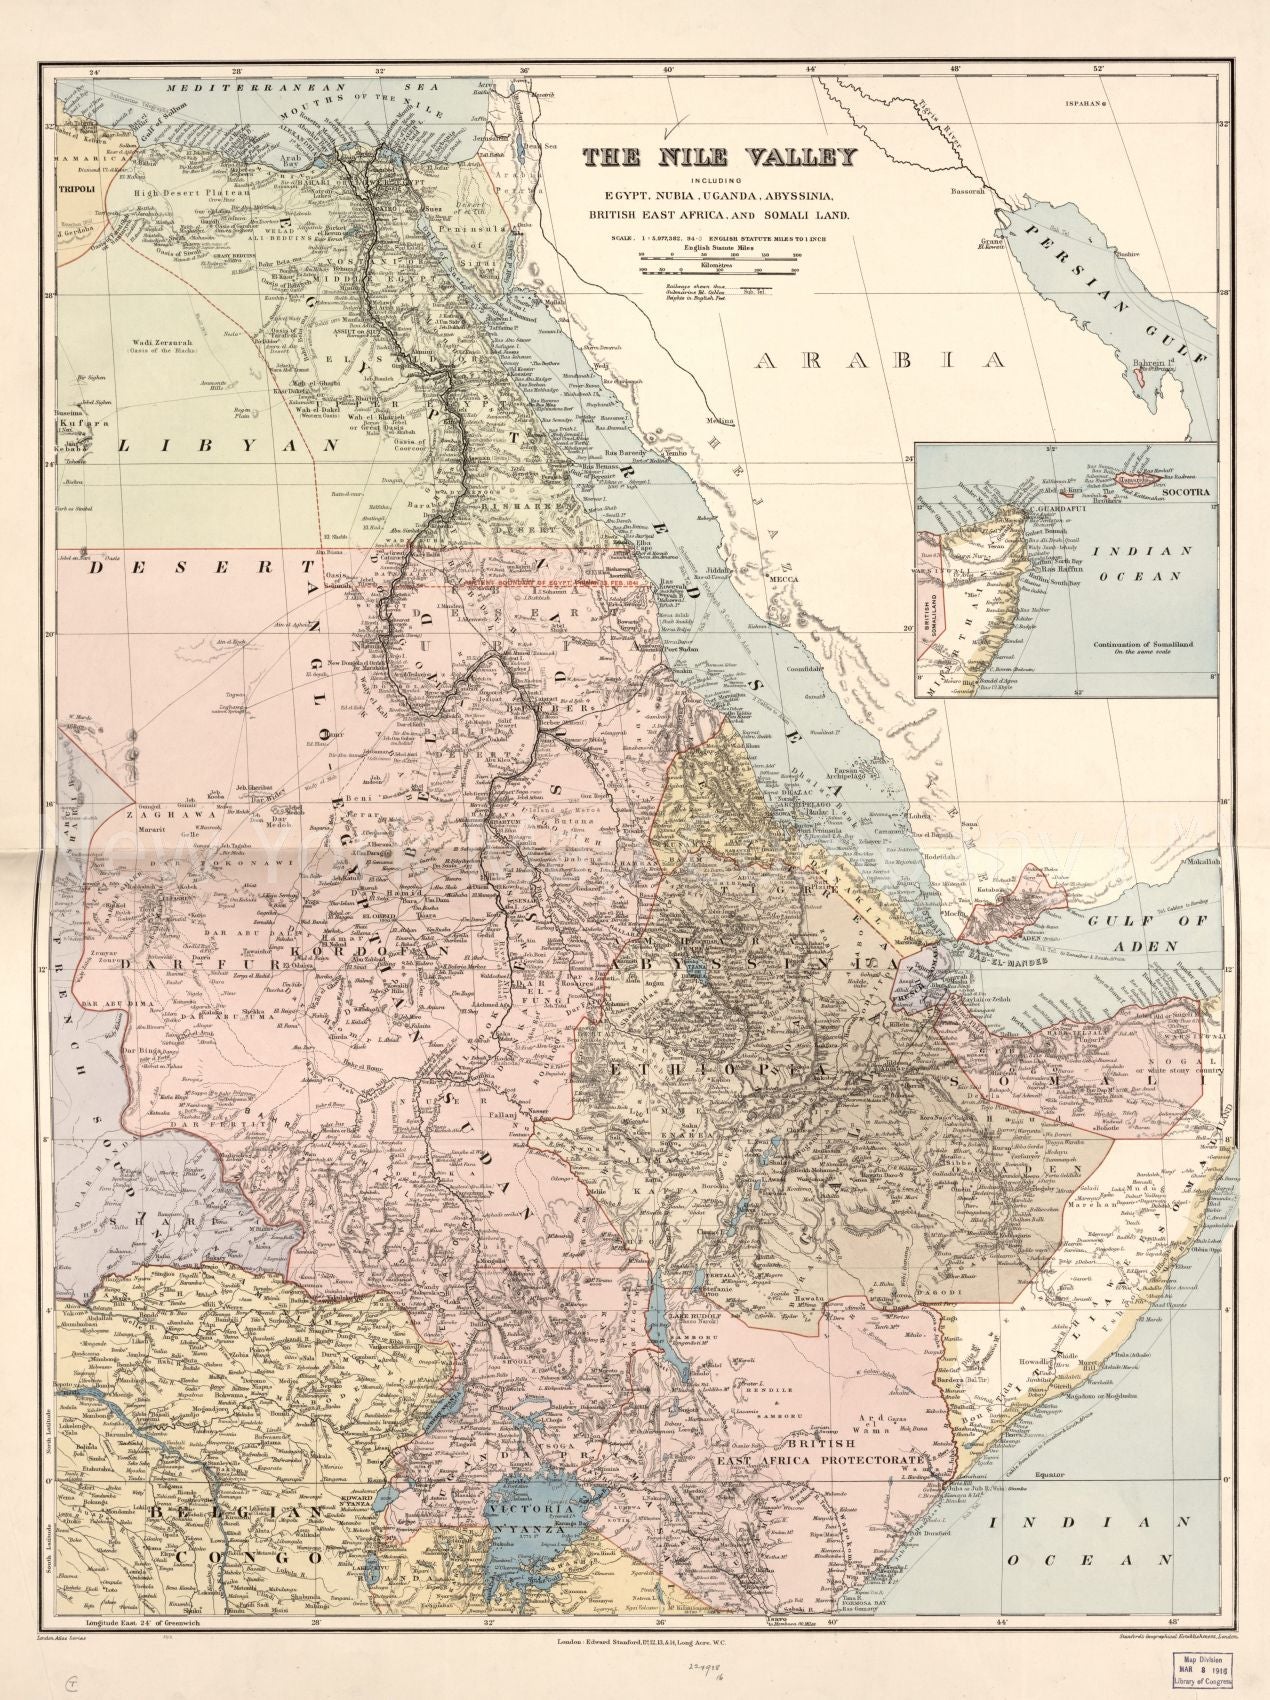 1910 map The Nile Valley: including Egypt, Nubia, Uganda, Abyssinia, British East Africa, and Somali Land. Map Subjects: Nile River Valley